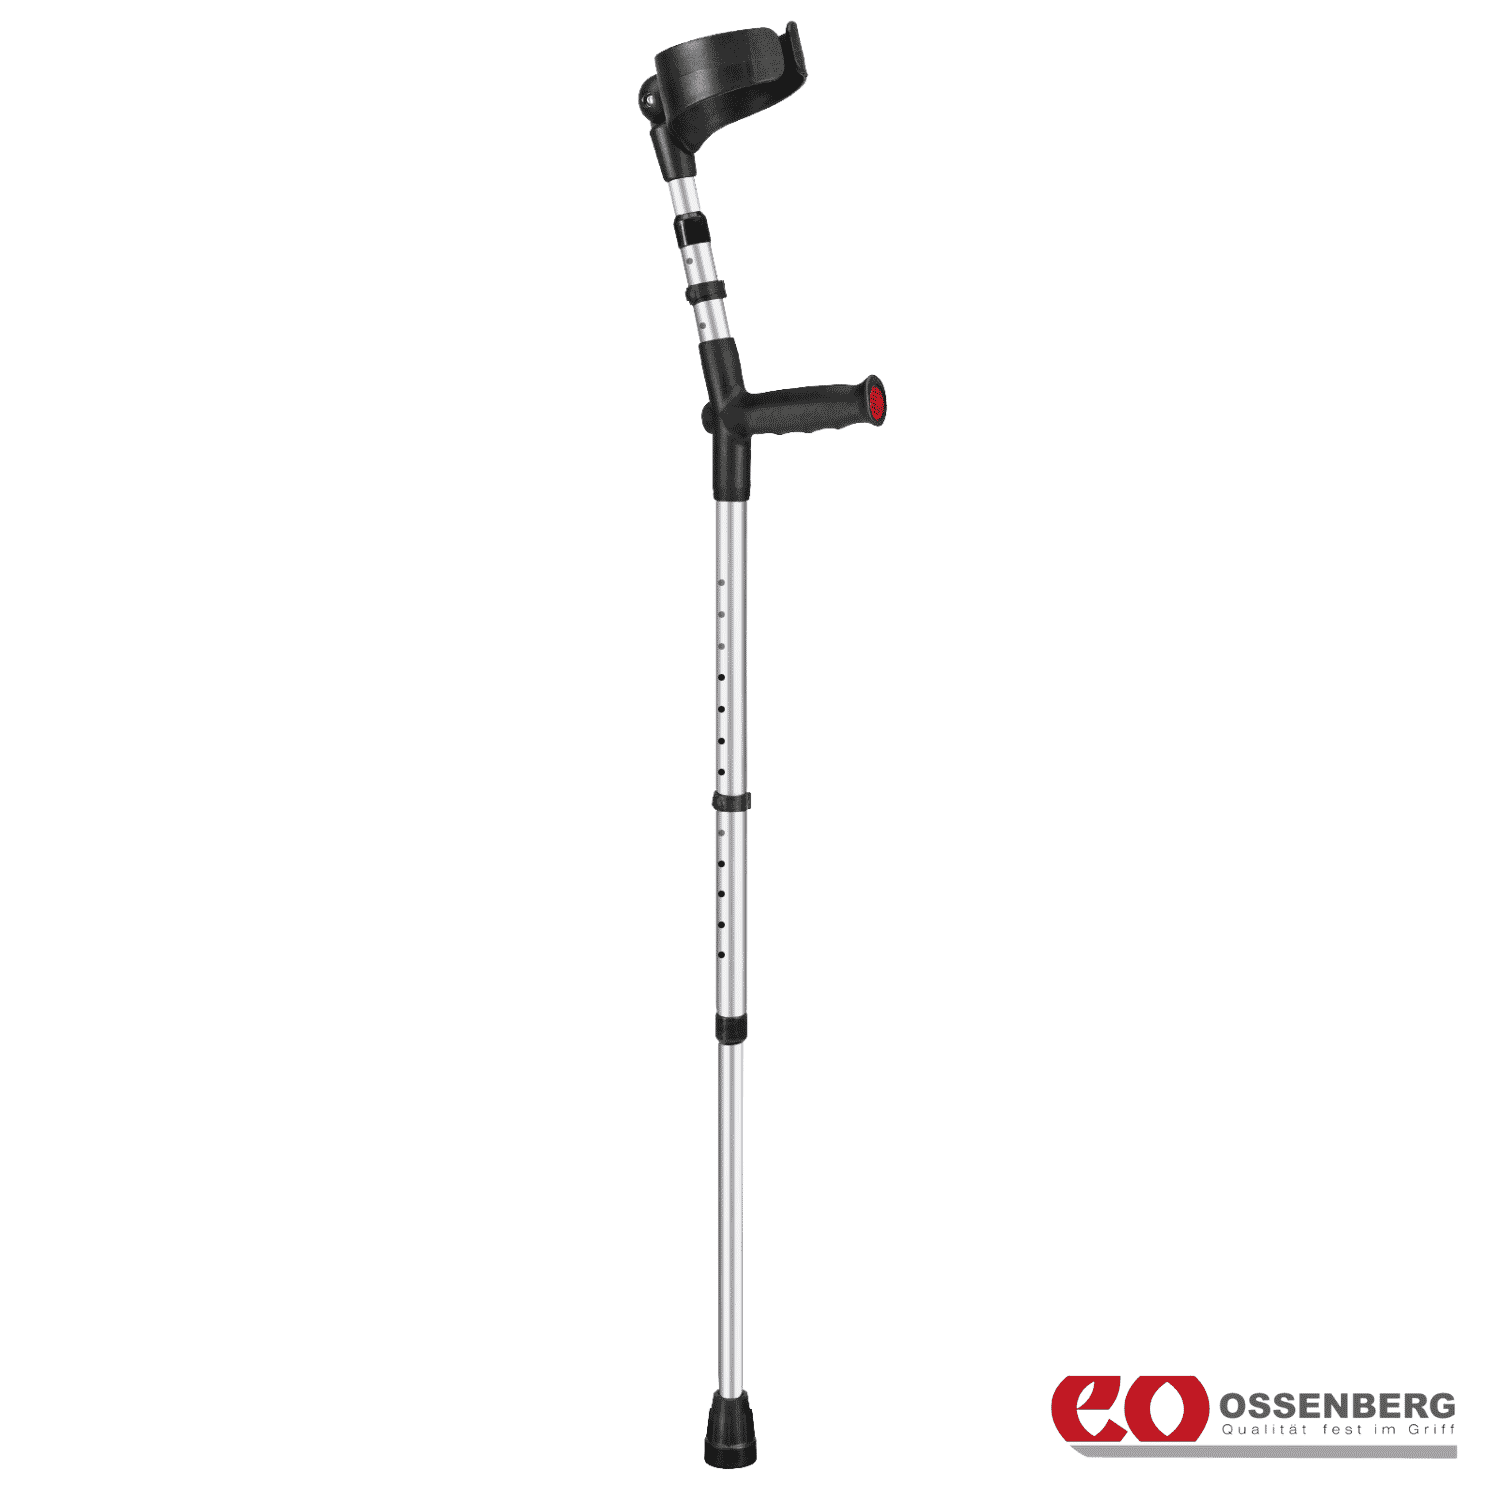 View Ossenberg Soft Grip Double Adjustable Crutches Silver Single information